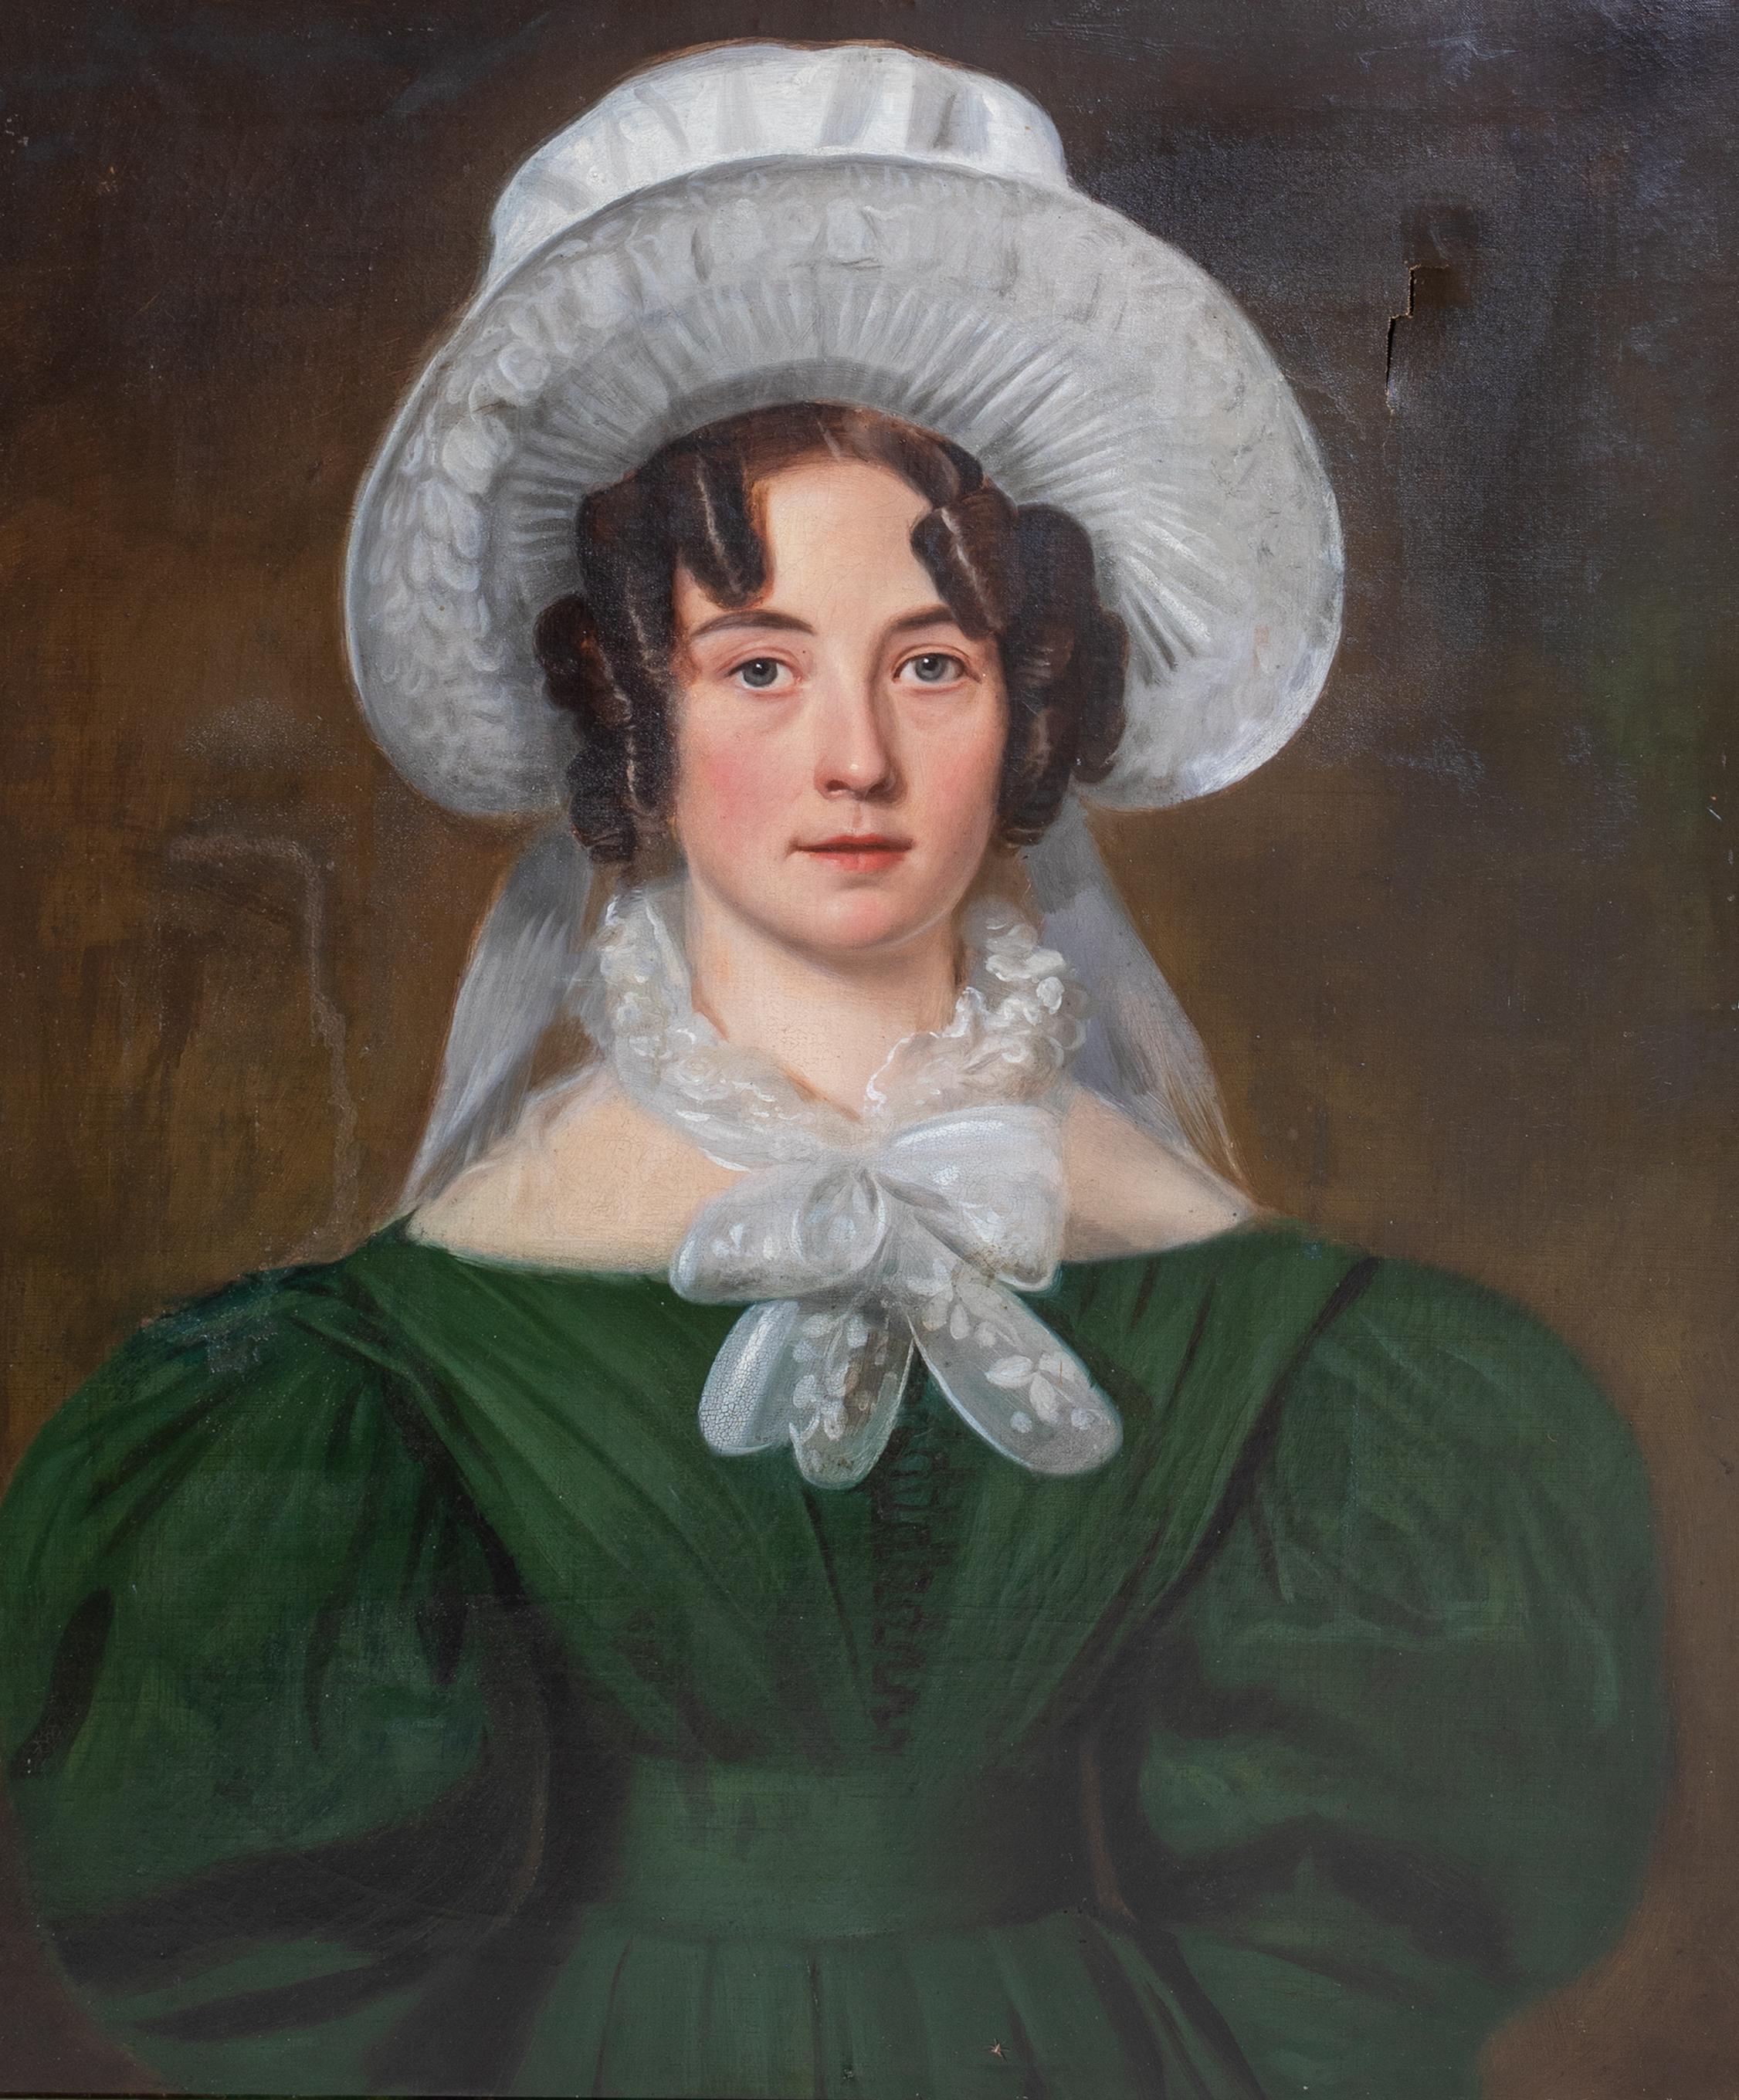 Portrait Of Matilda Currie, aged 28, Wearing an elaborate Bonnet, 19th Century

British School 

Large 19th Century British Victorian School portrait of Matilda Currie aged 28 wearing an elaborate white bonnet, oil on canvas, Exceptional quality and